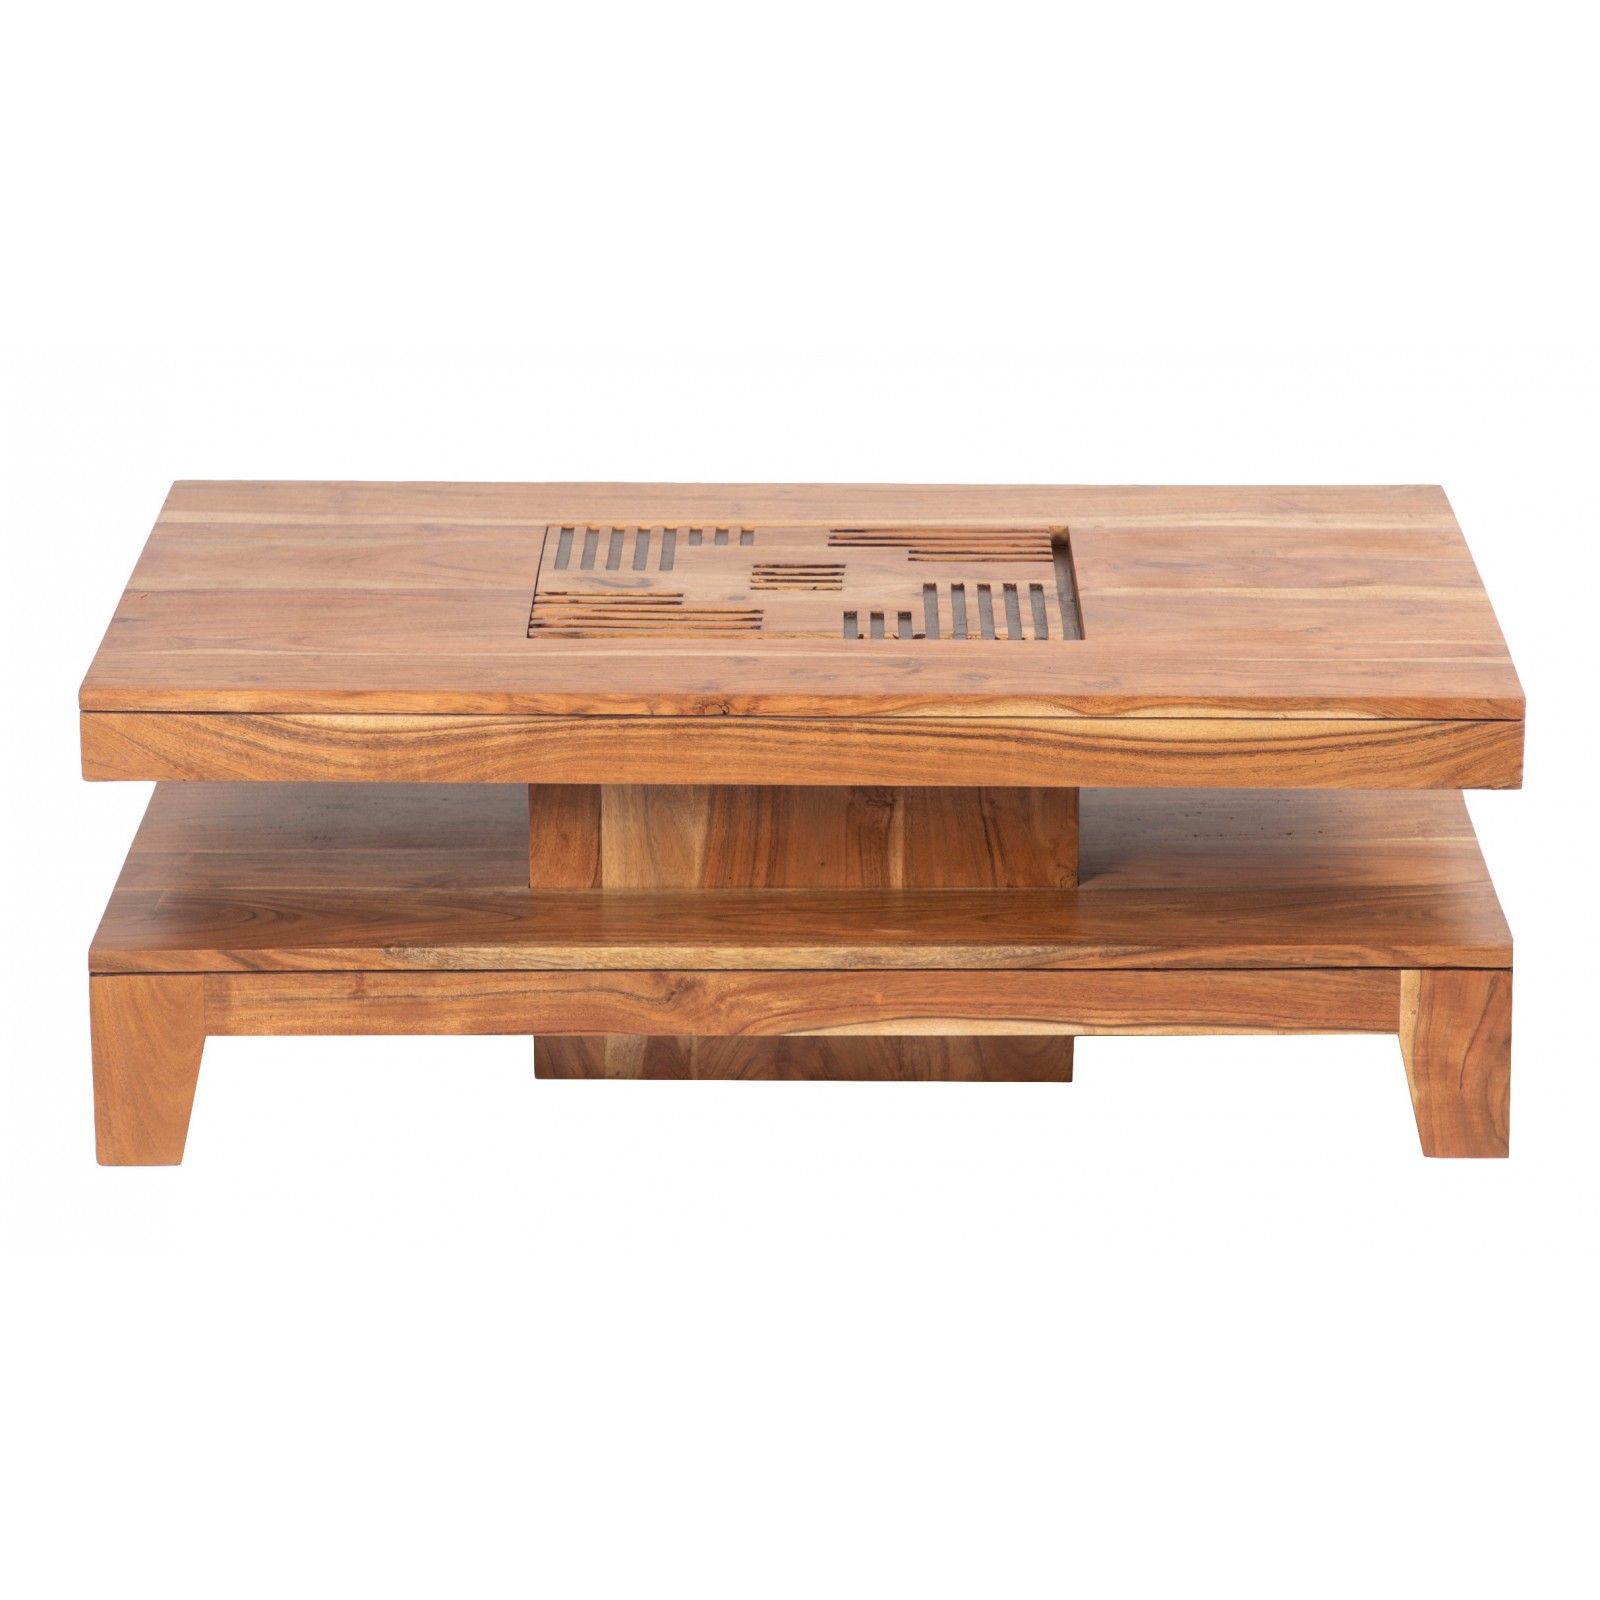 KAVISH II TABLE BASSE RECT PM Tables basses rectangulaires - 8